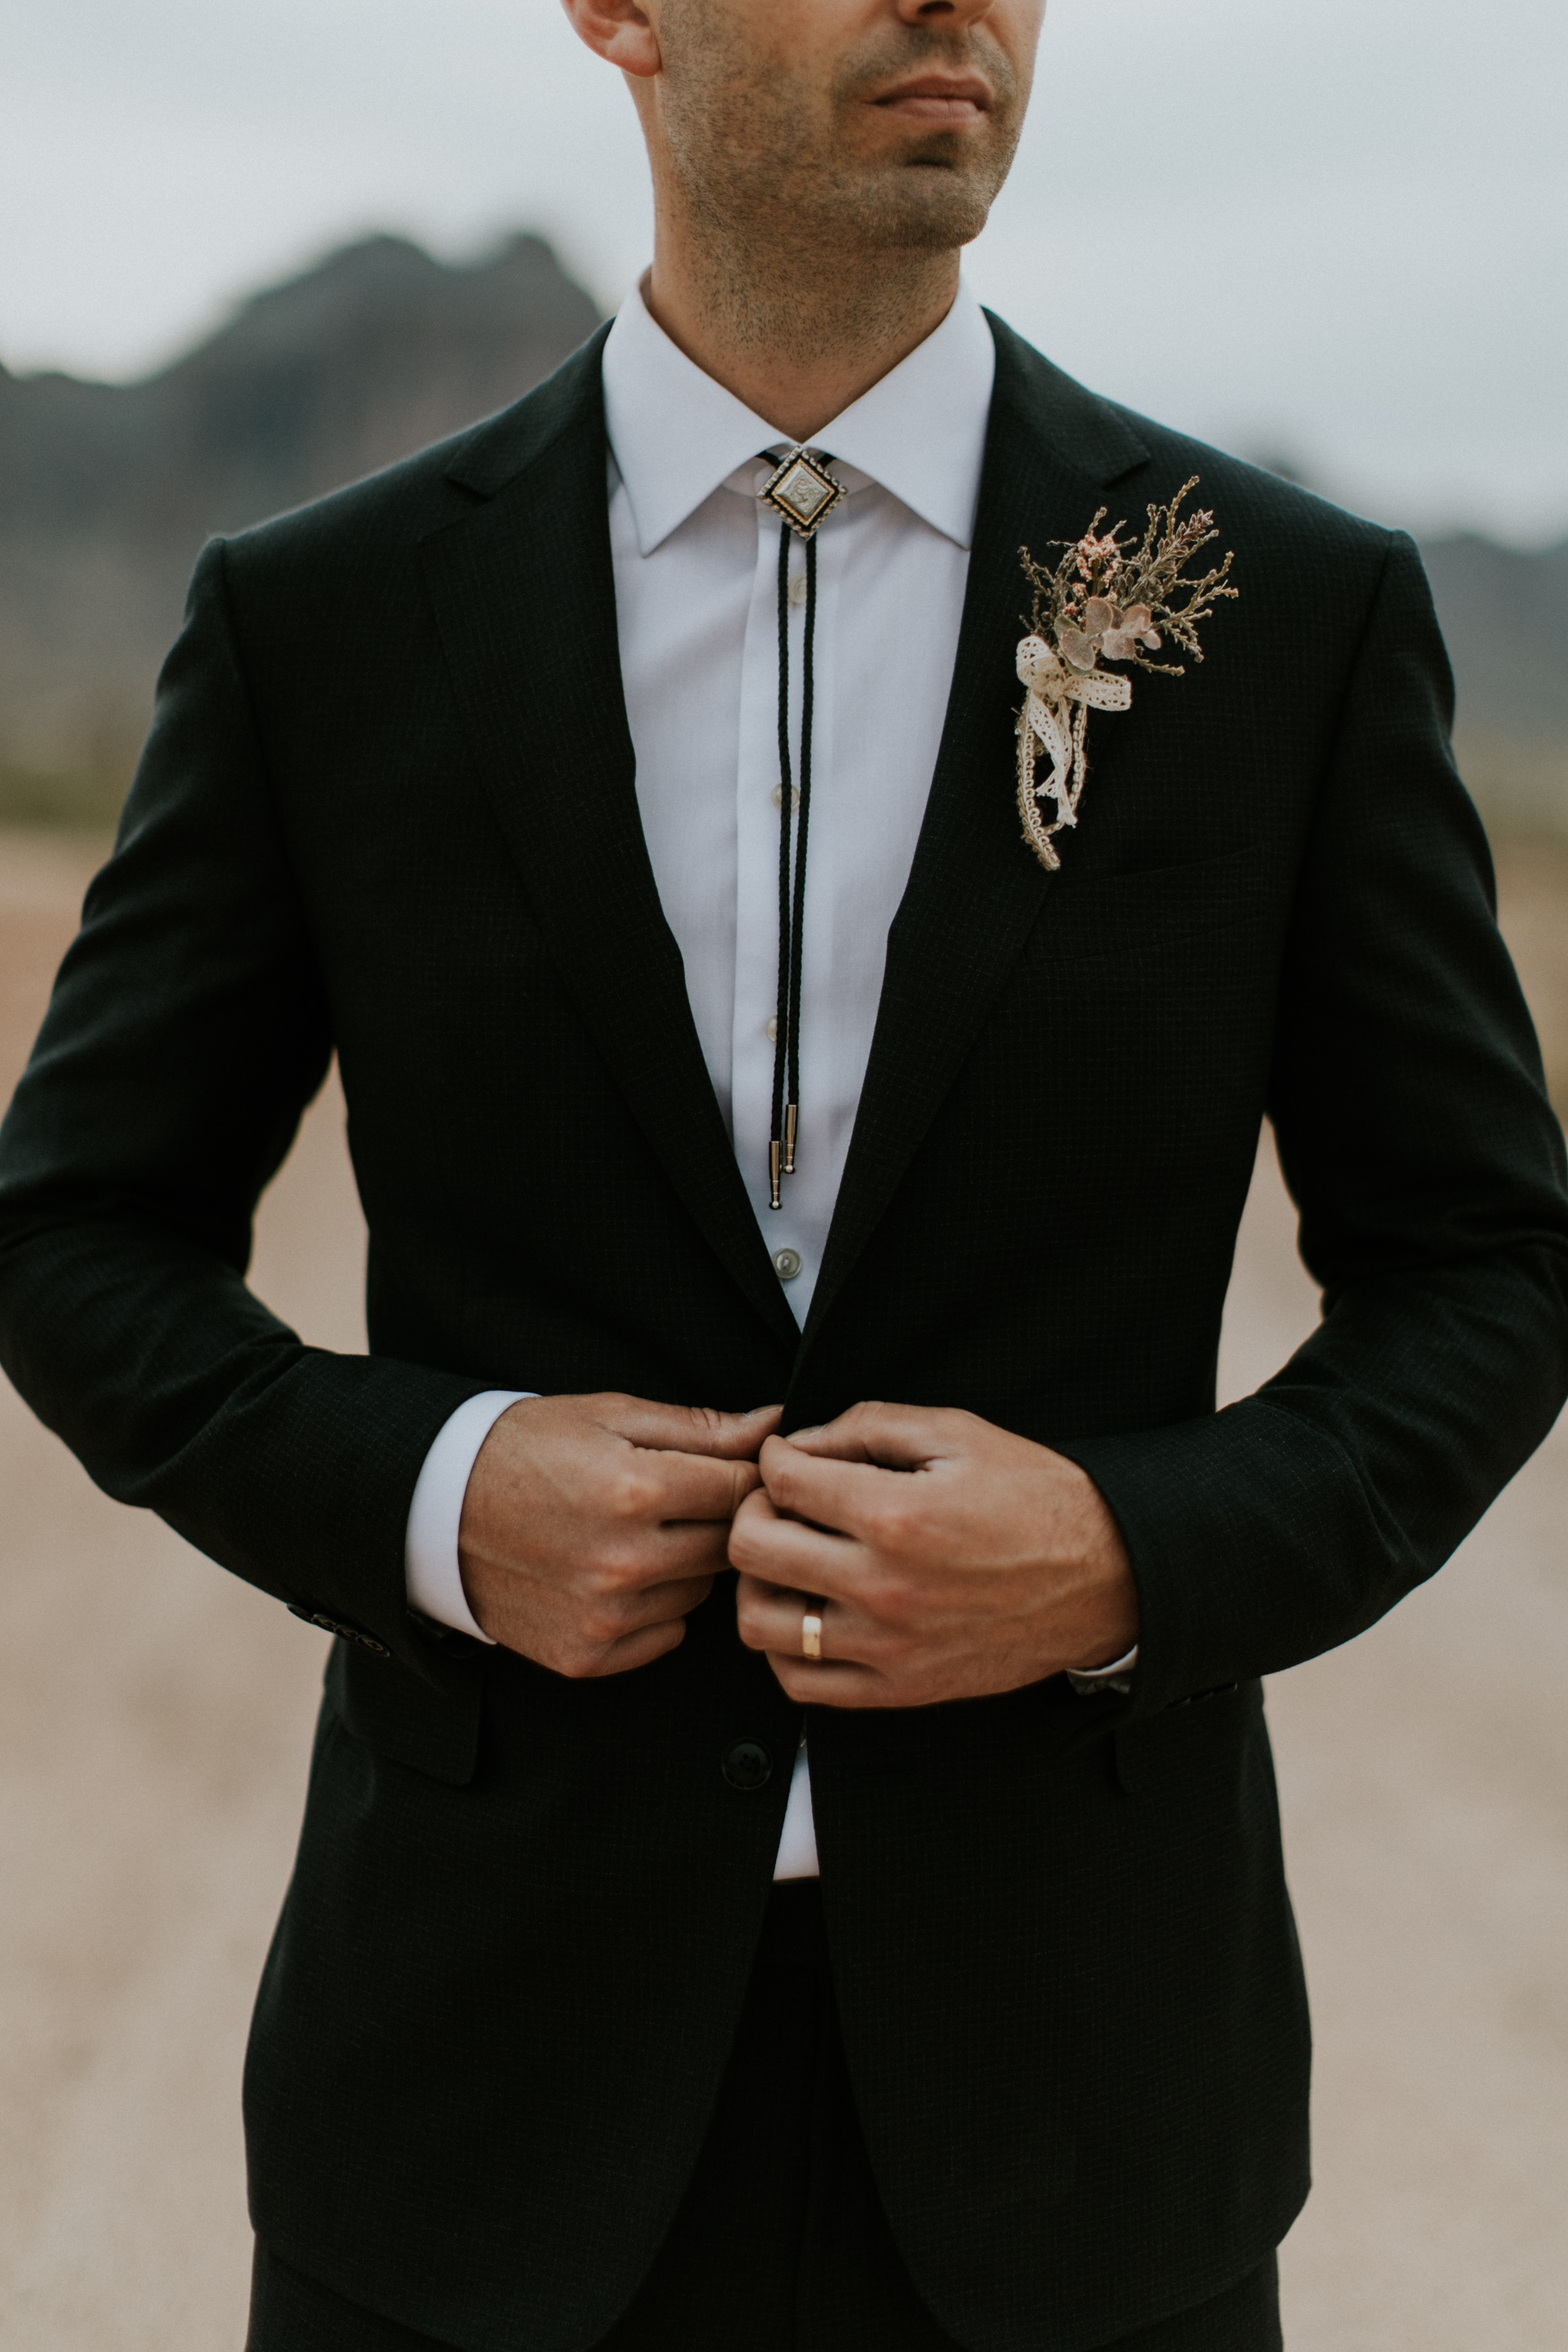 Wedding attire for men: A guide to dressing for an adventurous wedding